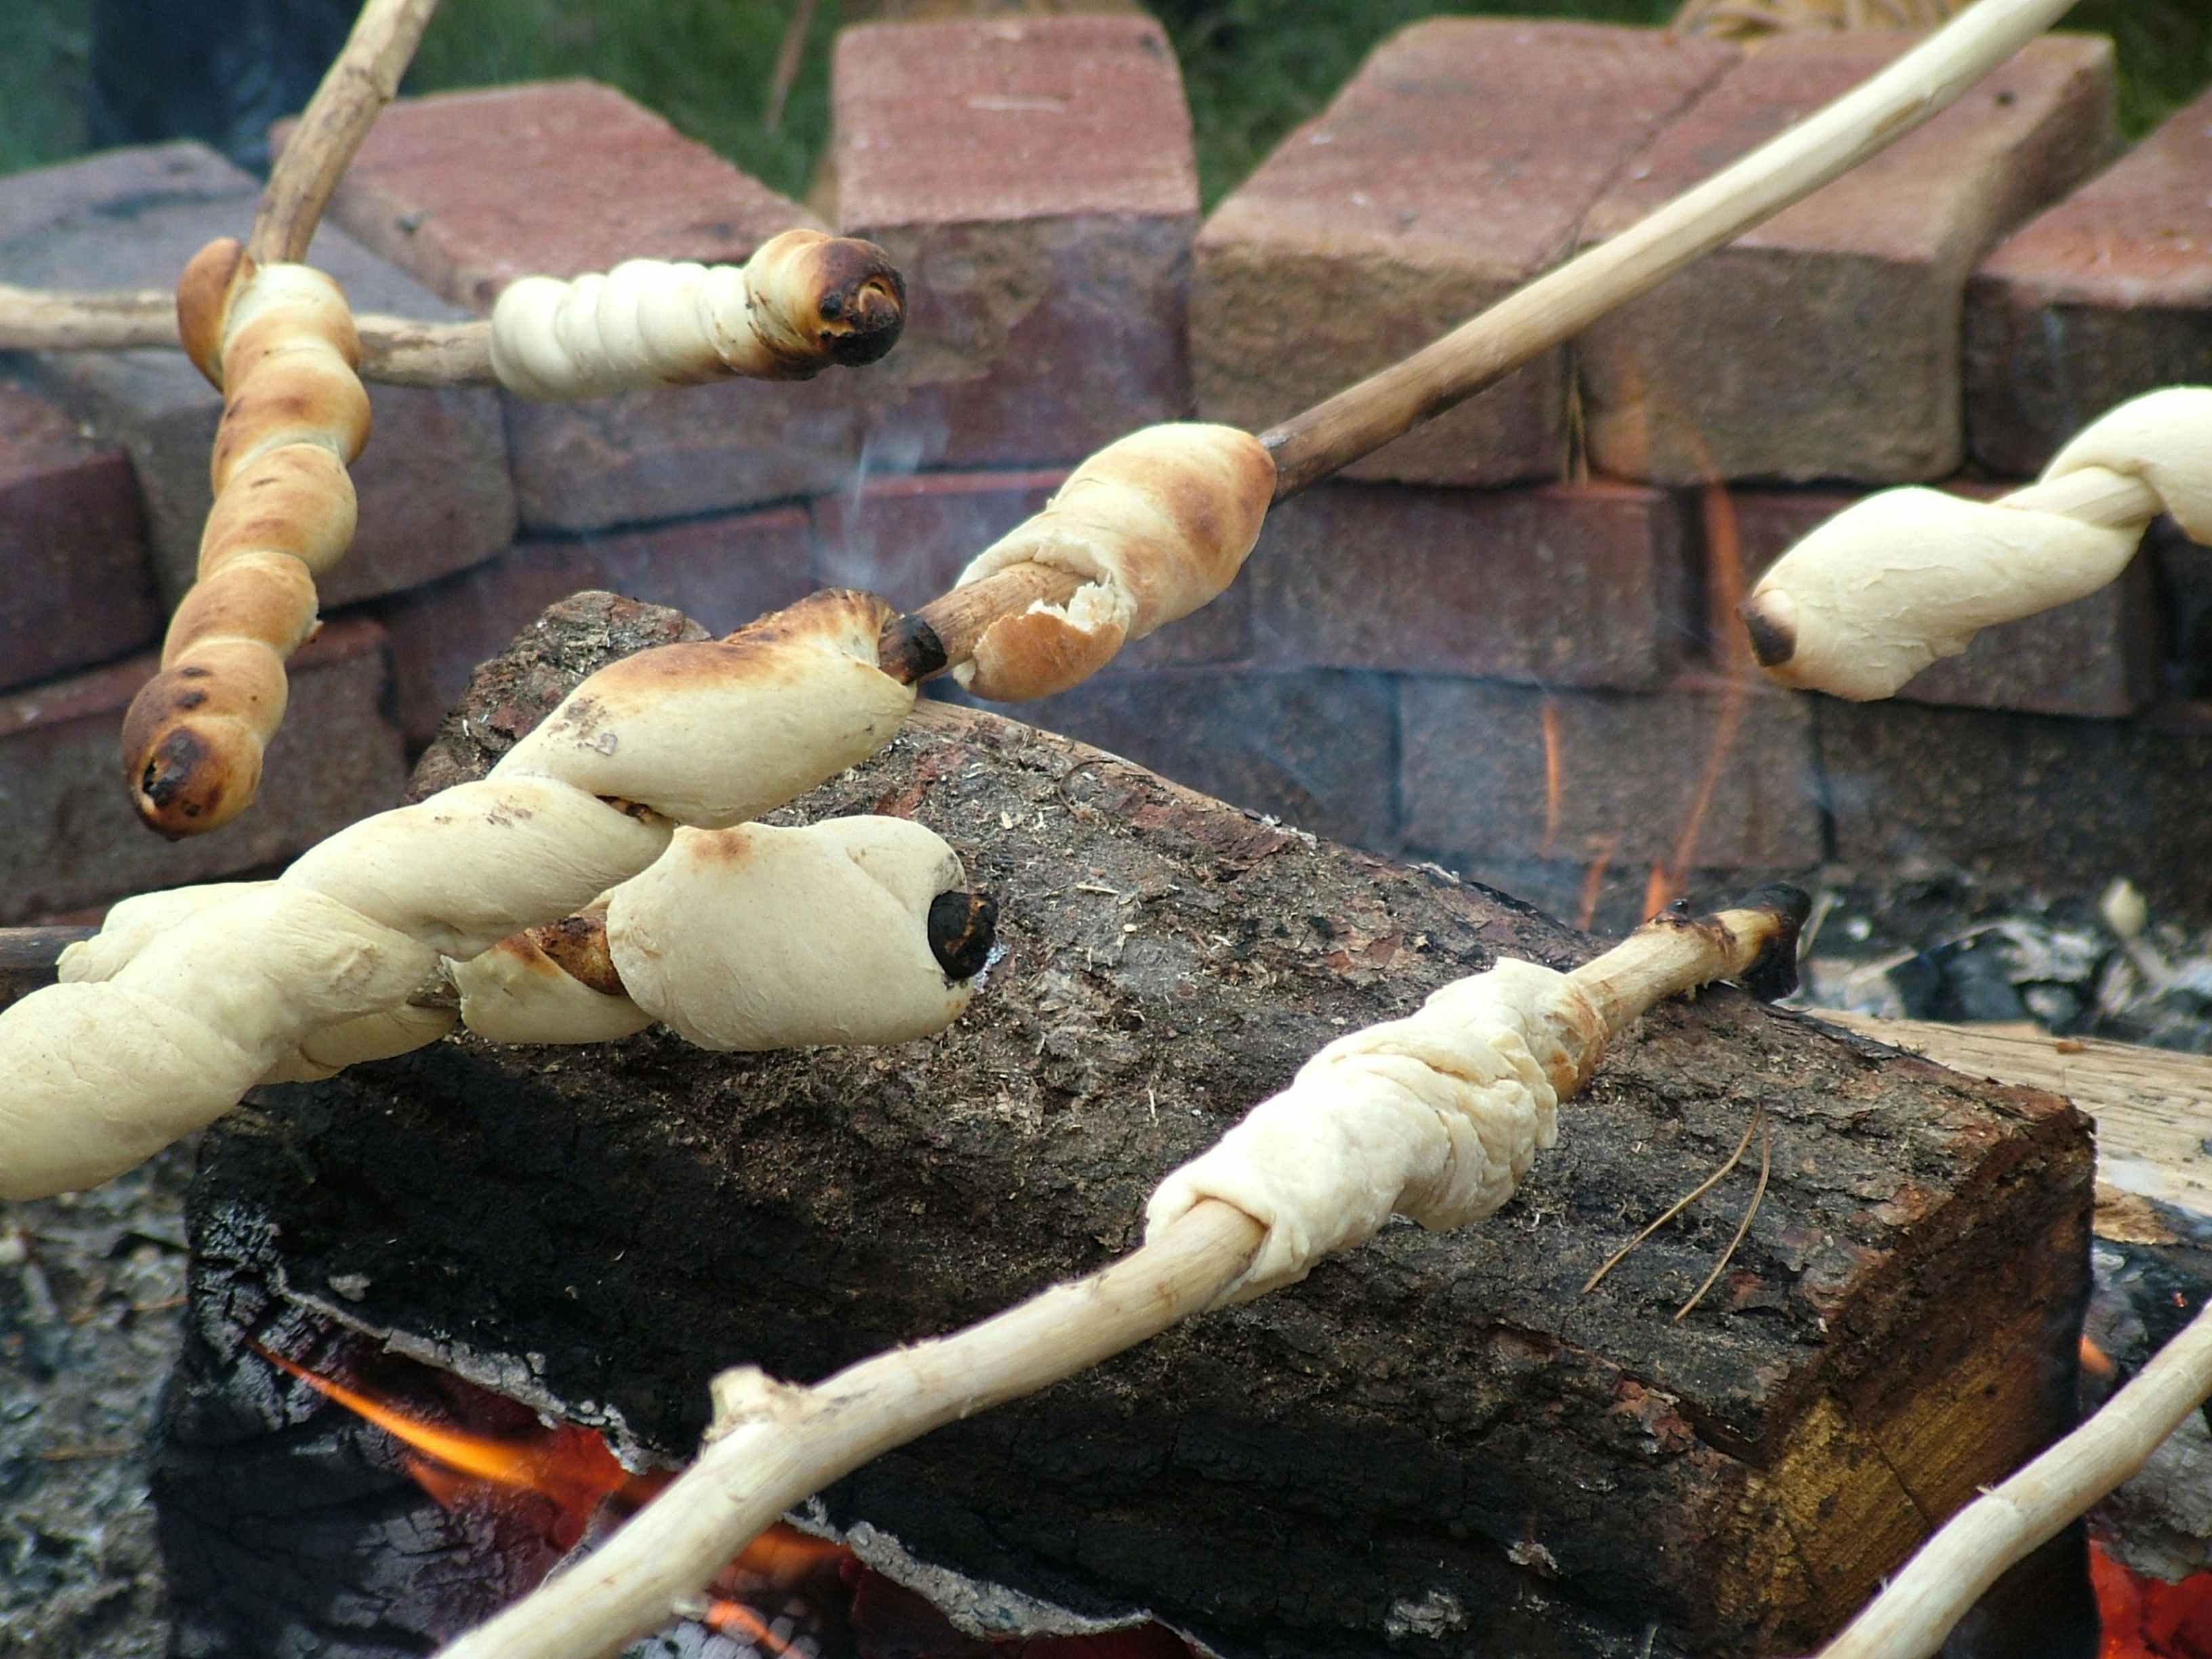 A bunch of people cooking some crescent rolls on a campfire